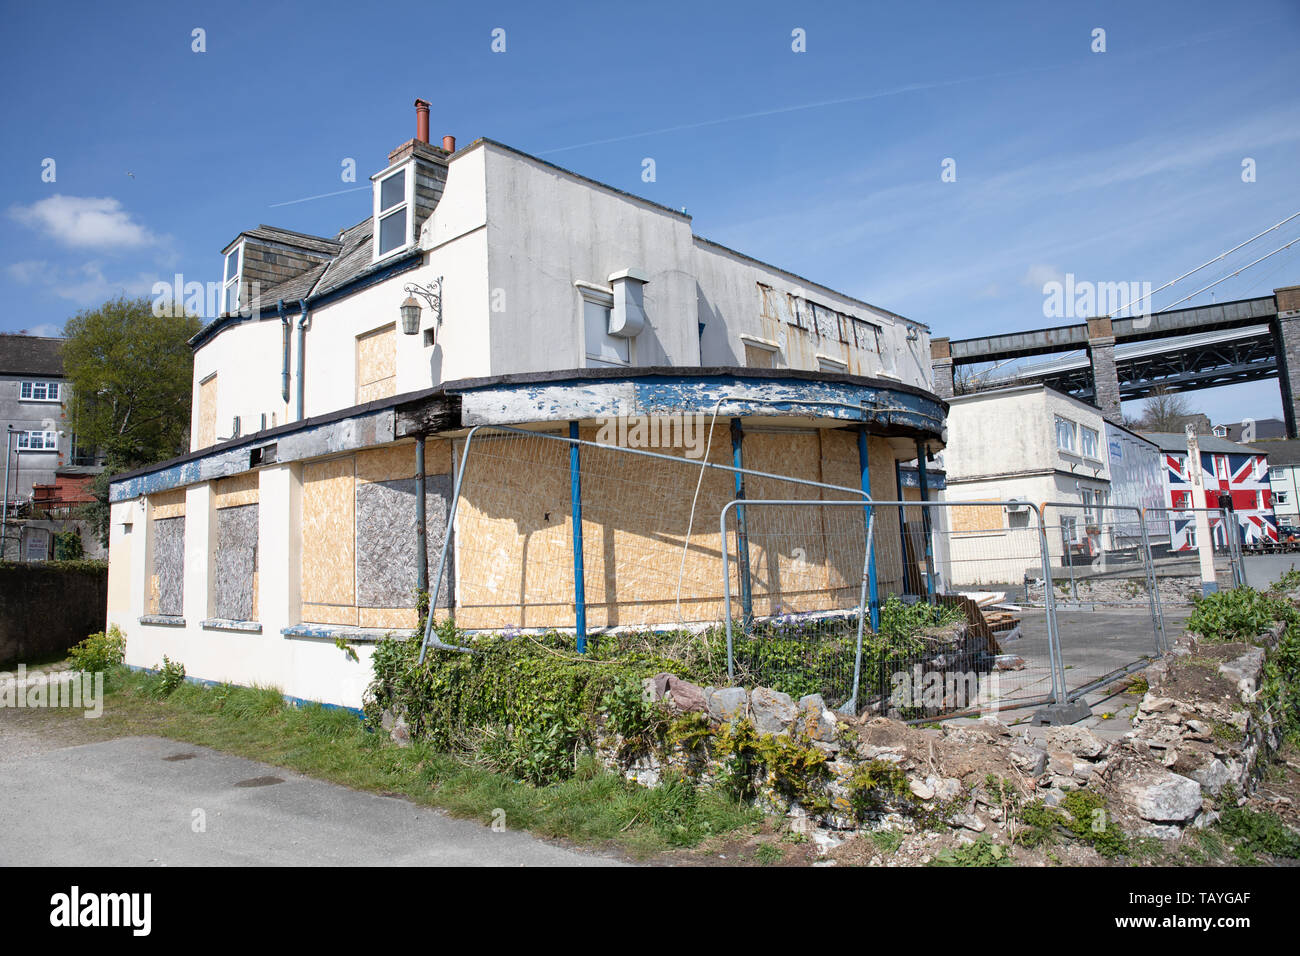 The Derelict Wheatsheaf Pub in Saltash, Cornwall Under Redevelopment Phase for Apartments on the River Tamar. Stock Photo